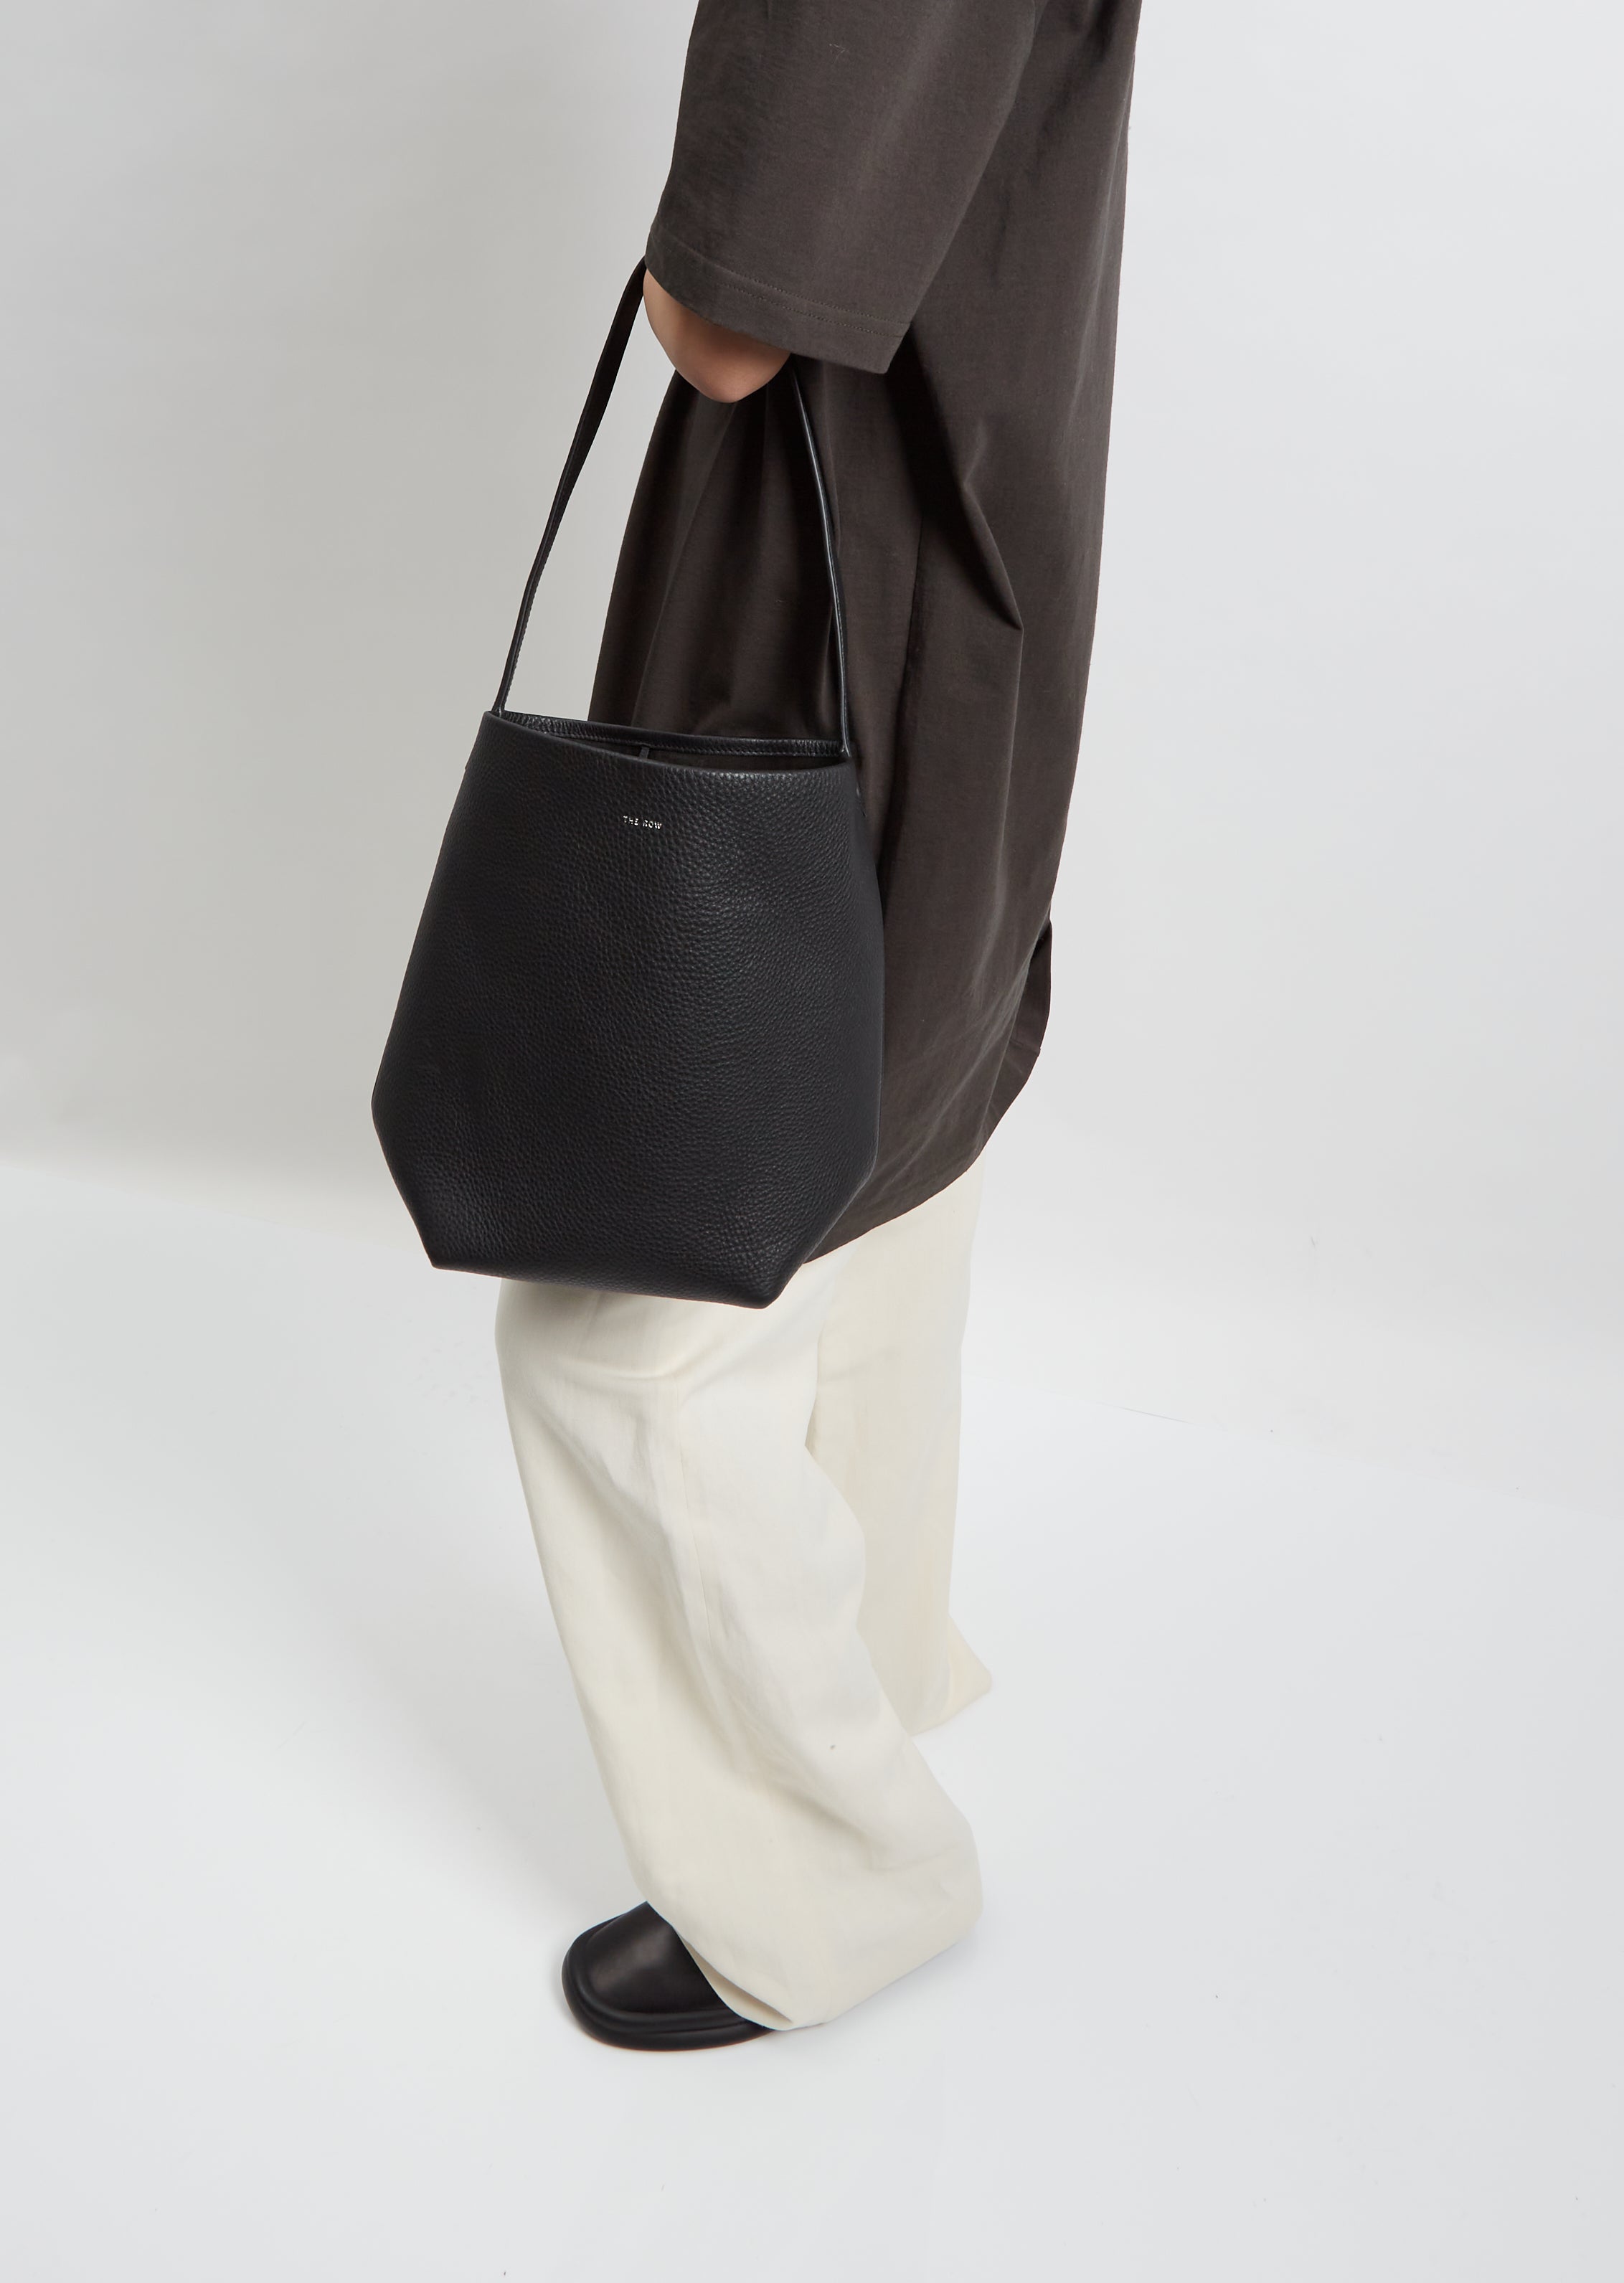 Park Leather Tote Bag in Black - The Row